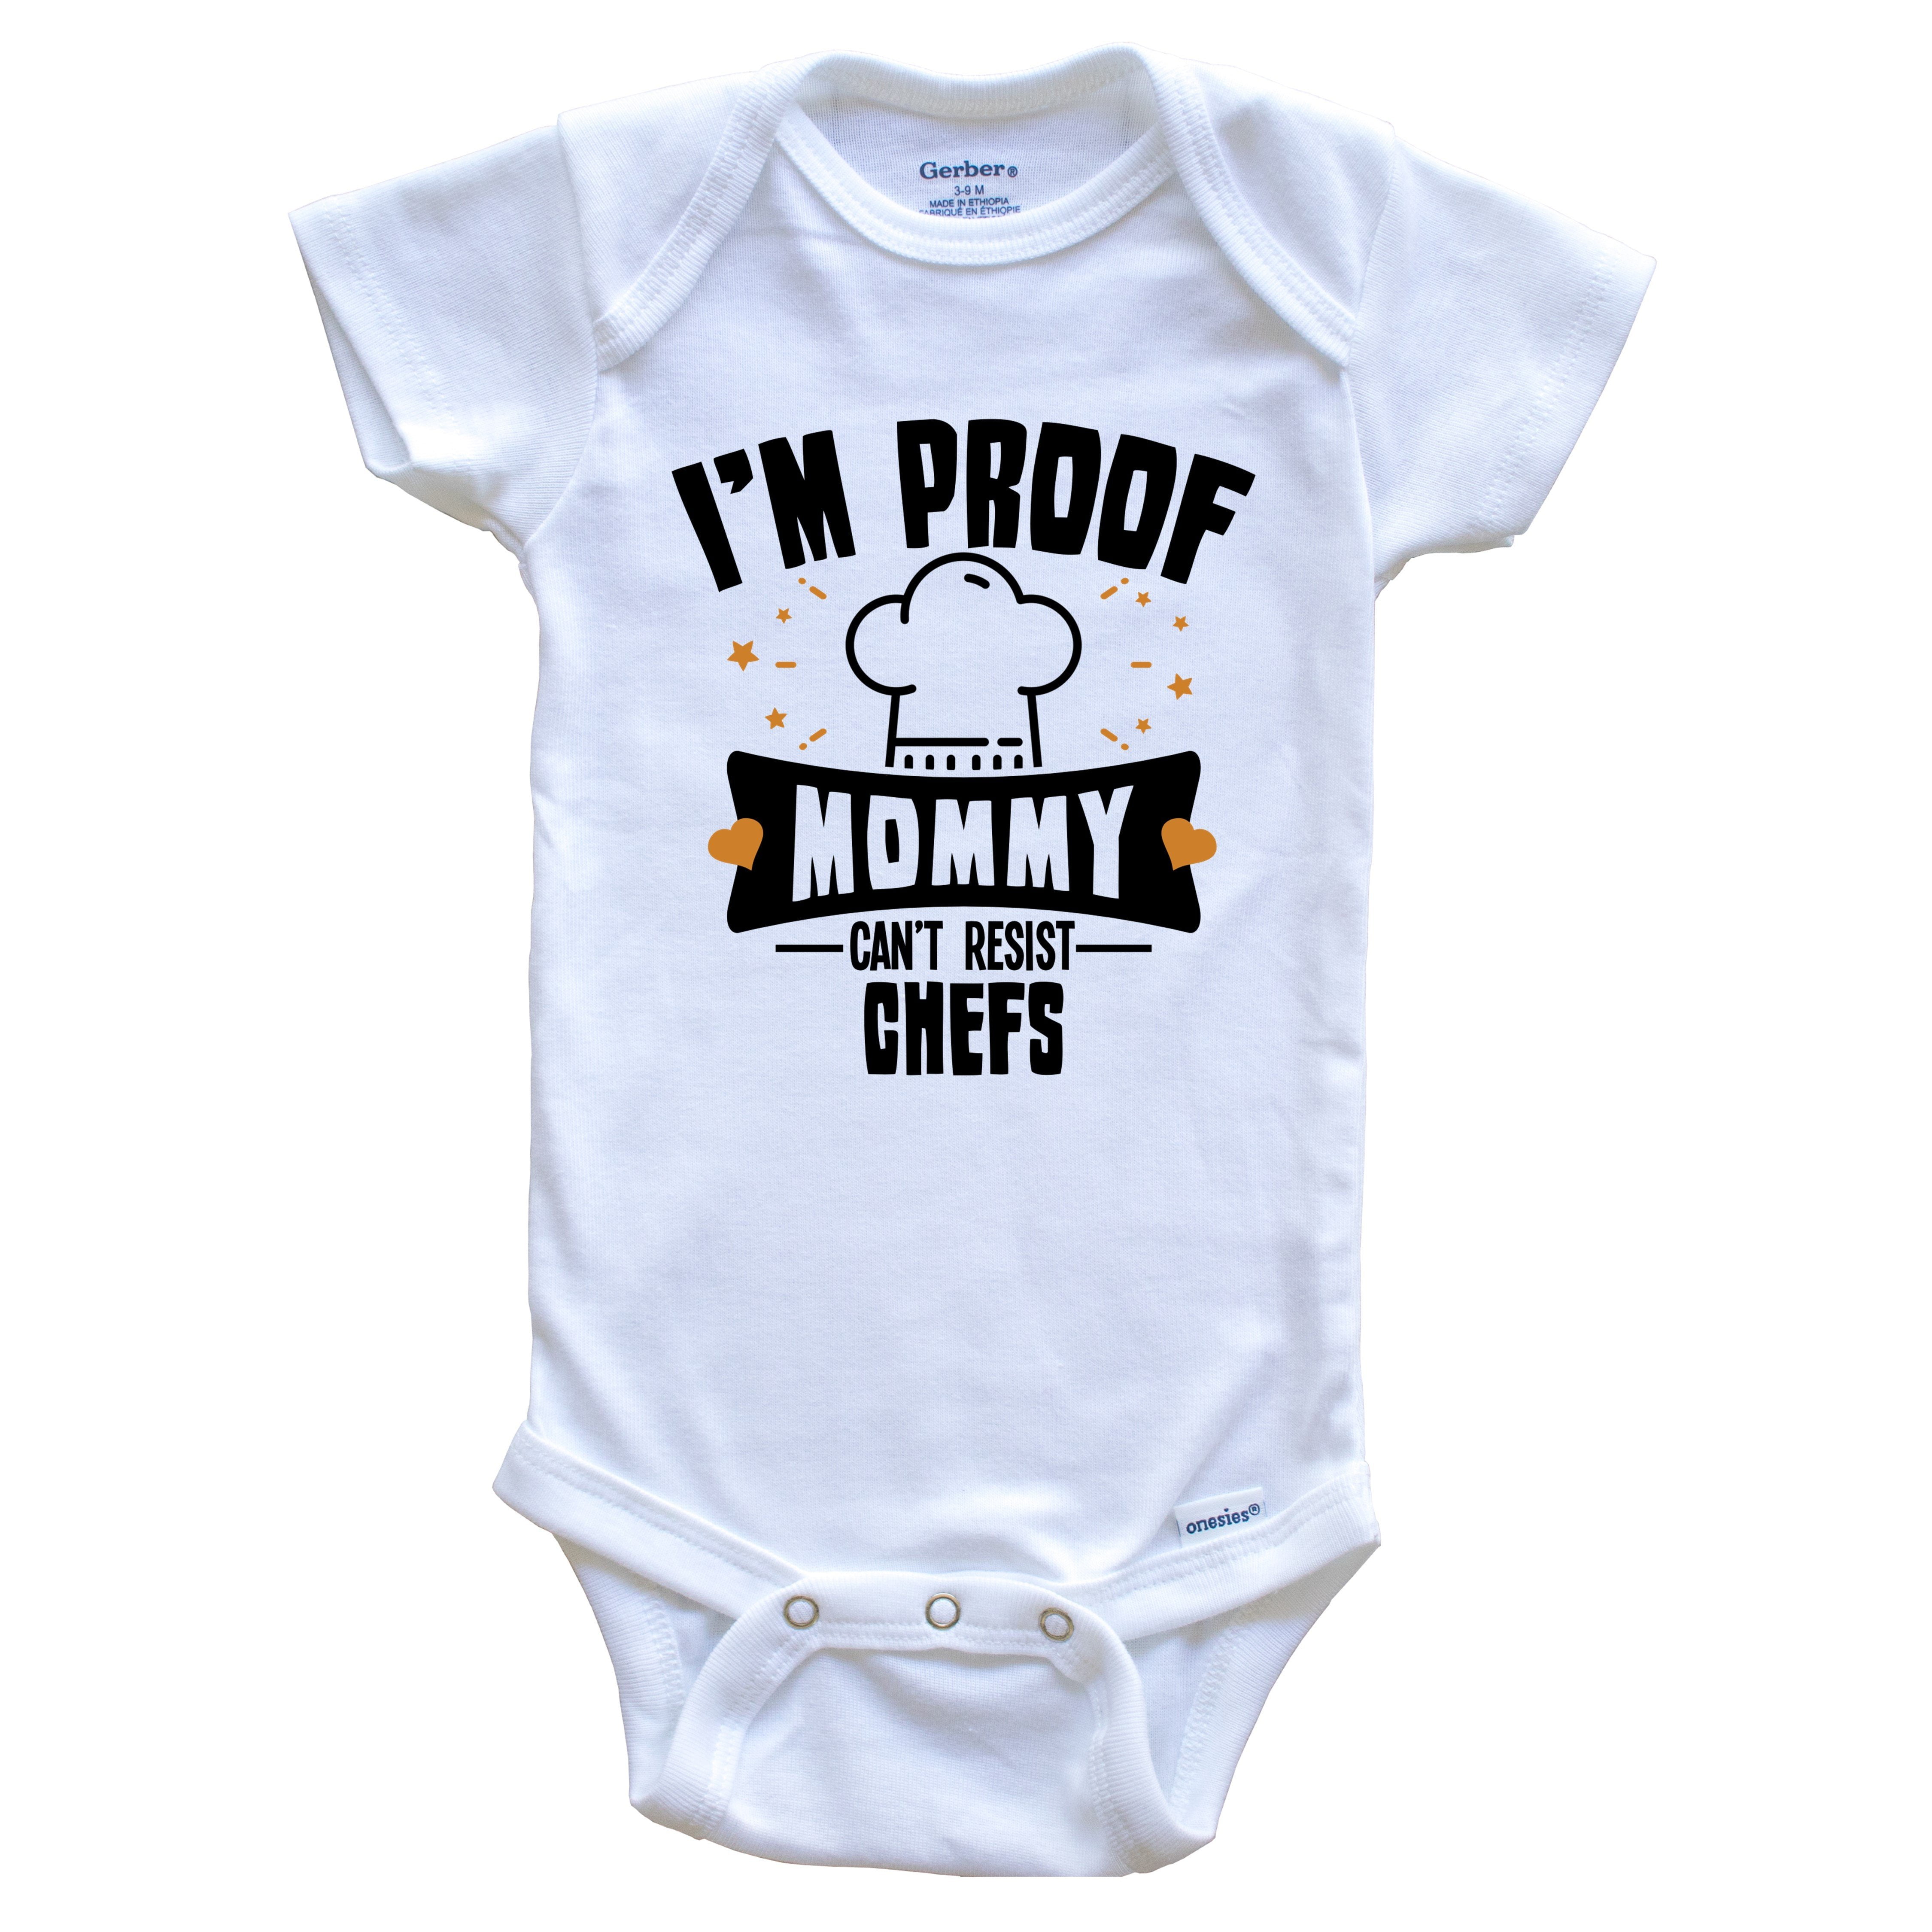 Funny Cooking Baby Bodysuit I M Proof Mommy Can T Resist Chefs Baby Bodysuit Walmart Com